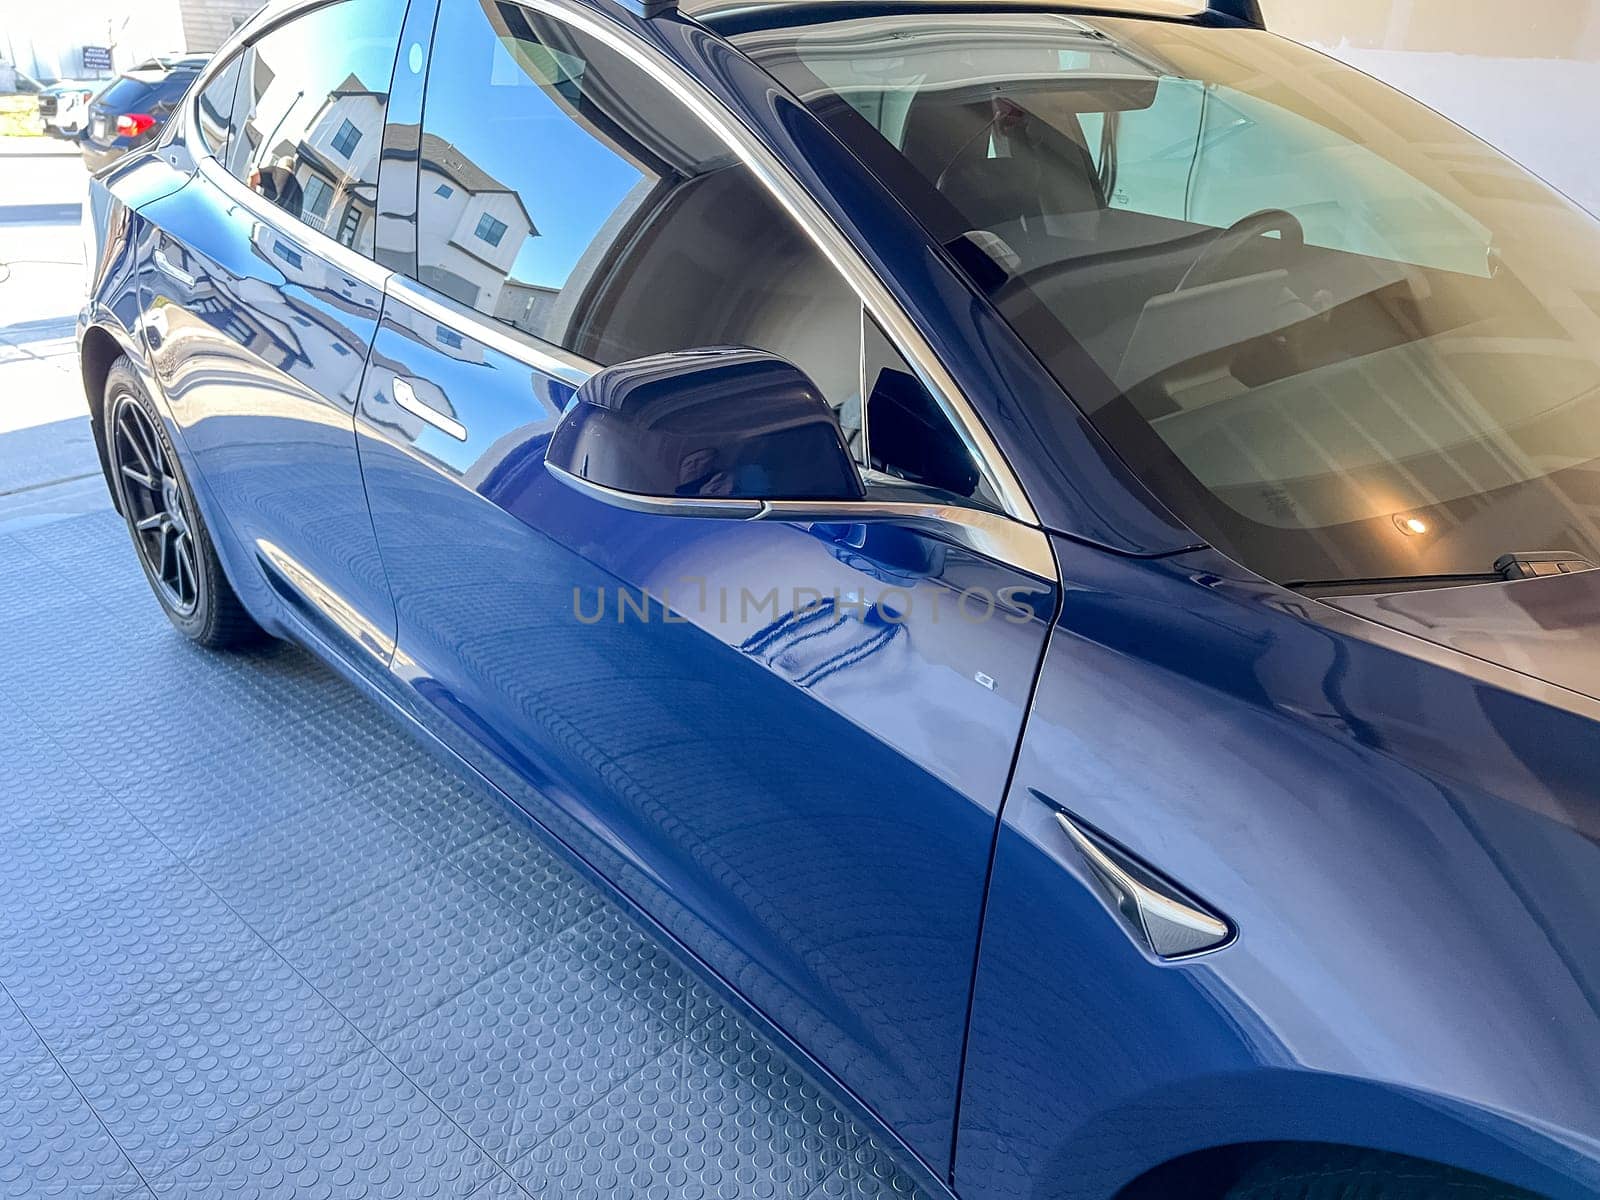 Tesla Model 3 Receiving a Wash in the Garage of a Suburban Home by arinahabich